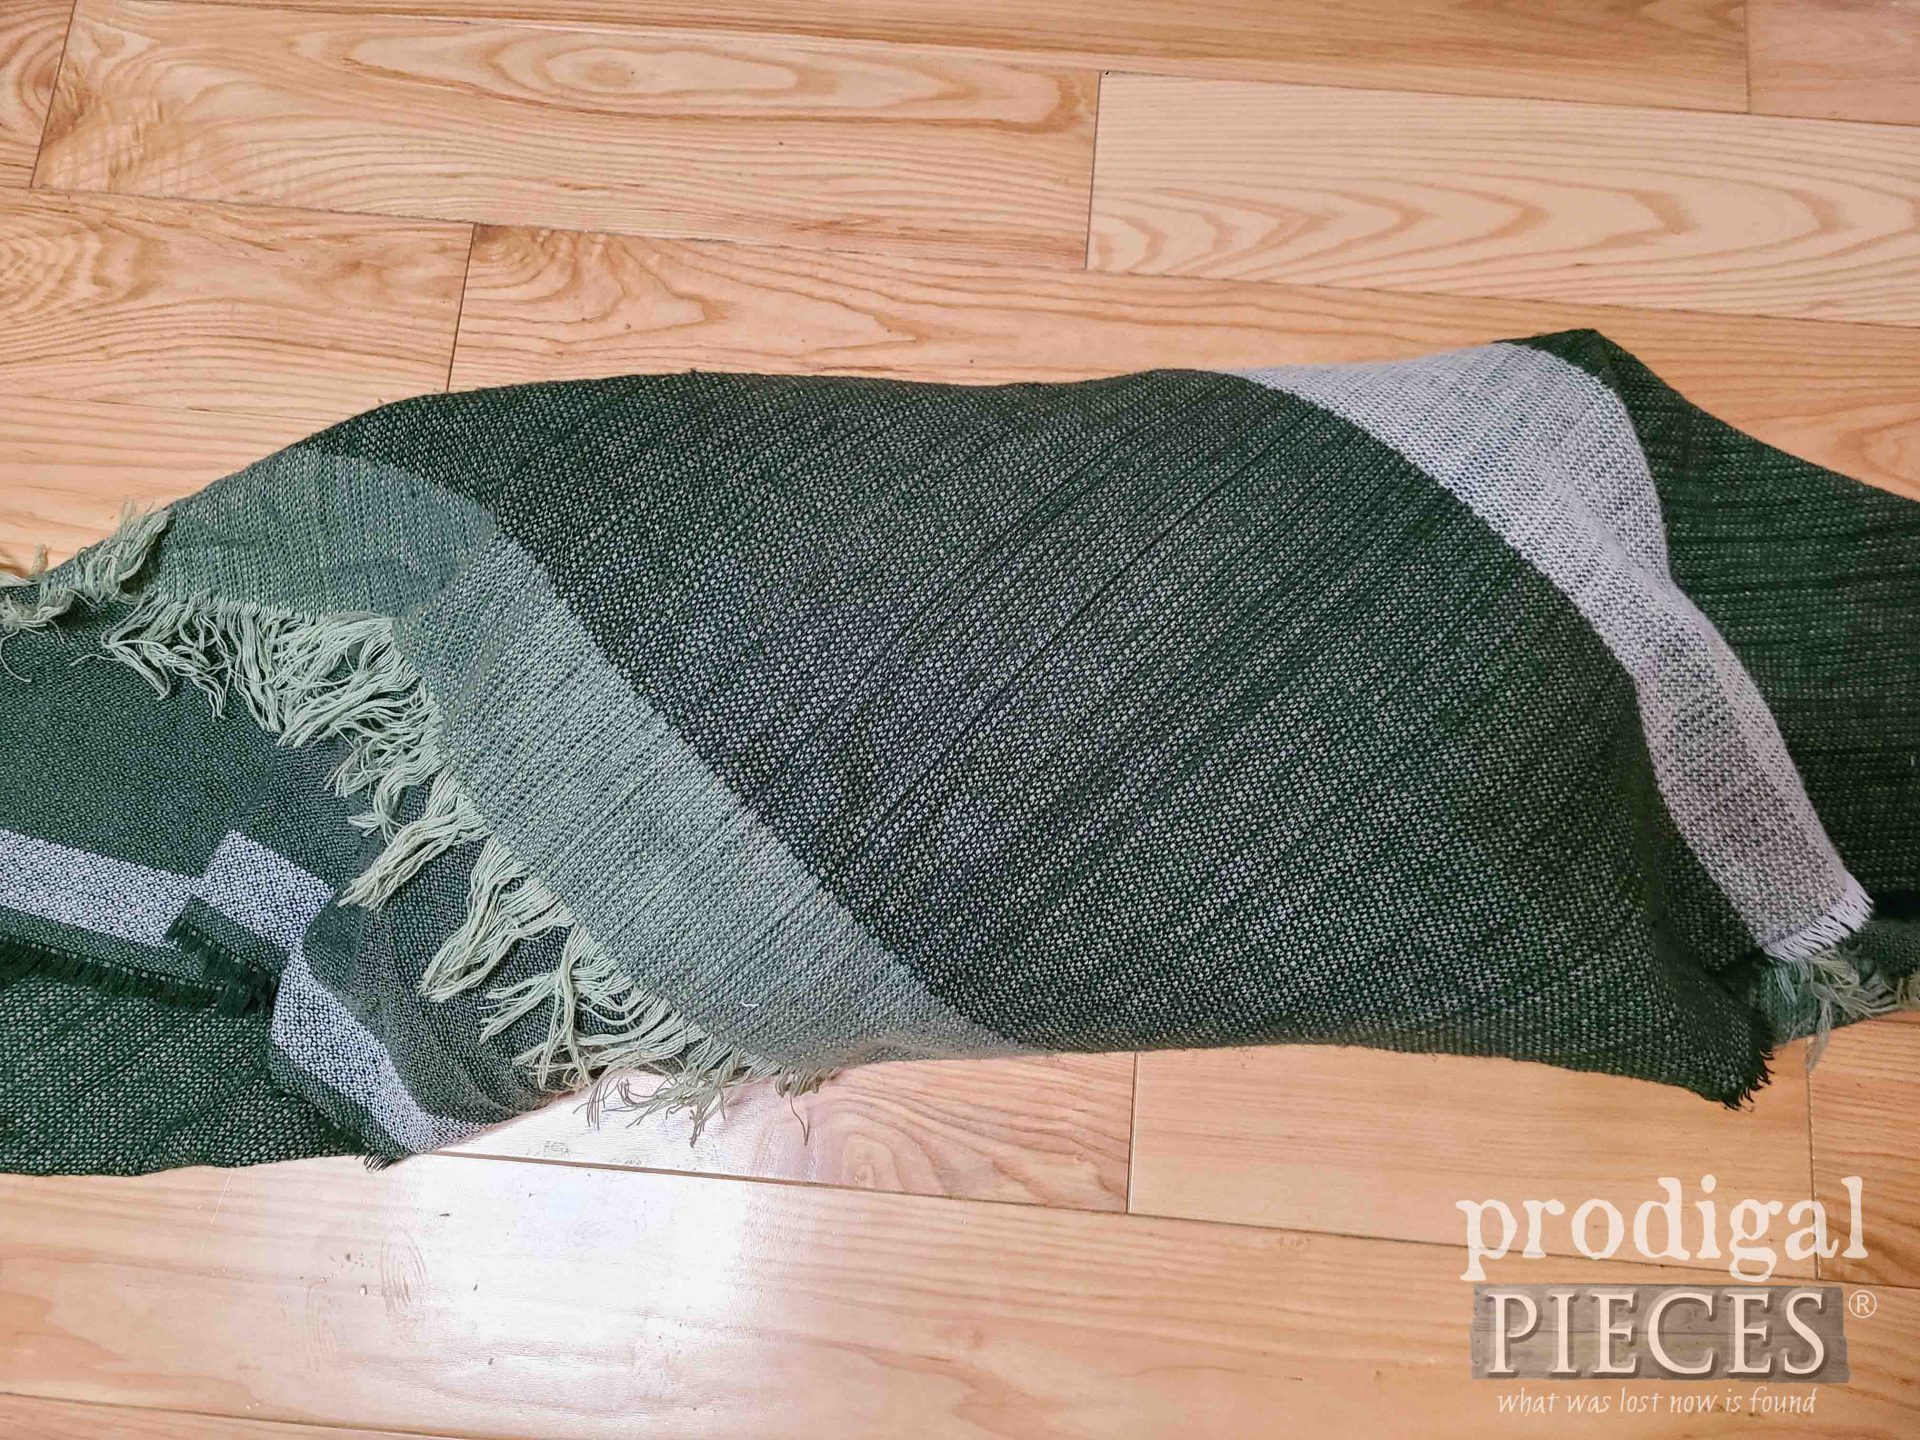 Upcycled Scarves for PIllow Coverings | prodigalpieces.com